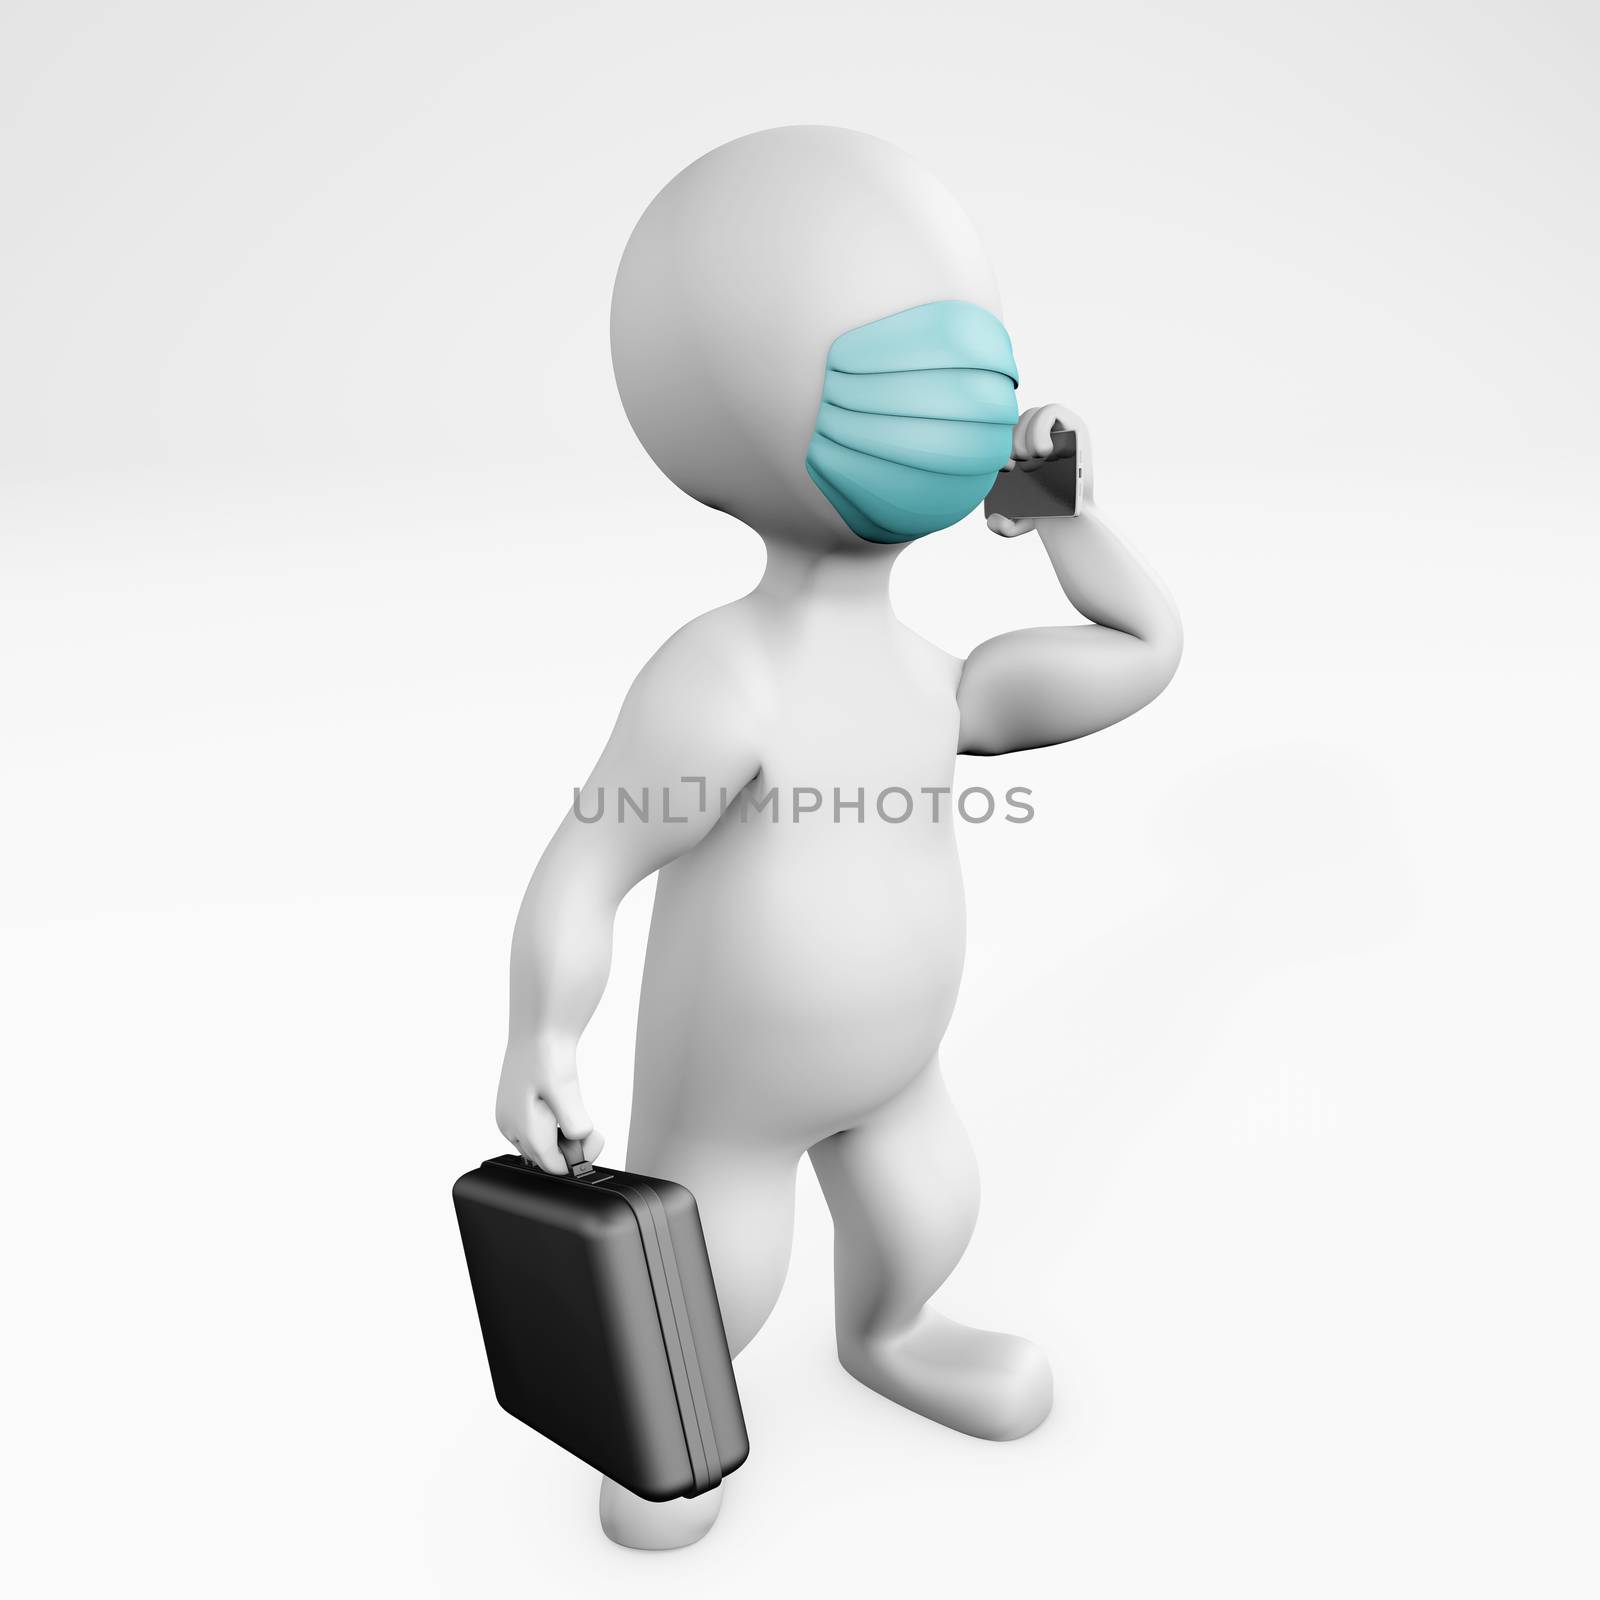 Fatty businessman with a mask talking on the phone 3d rendering by F1b0nacci